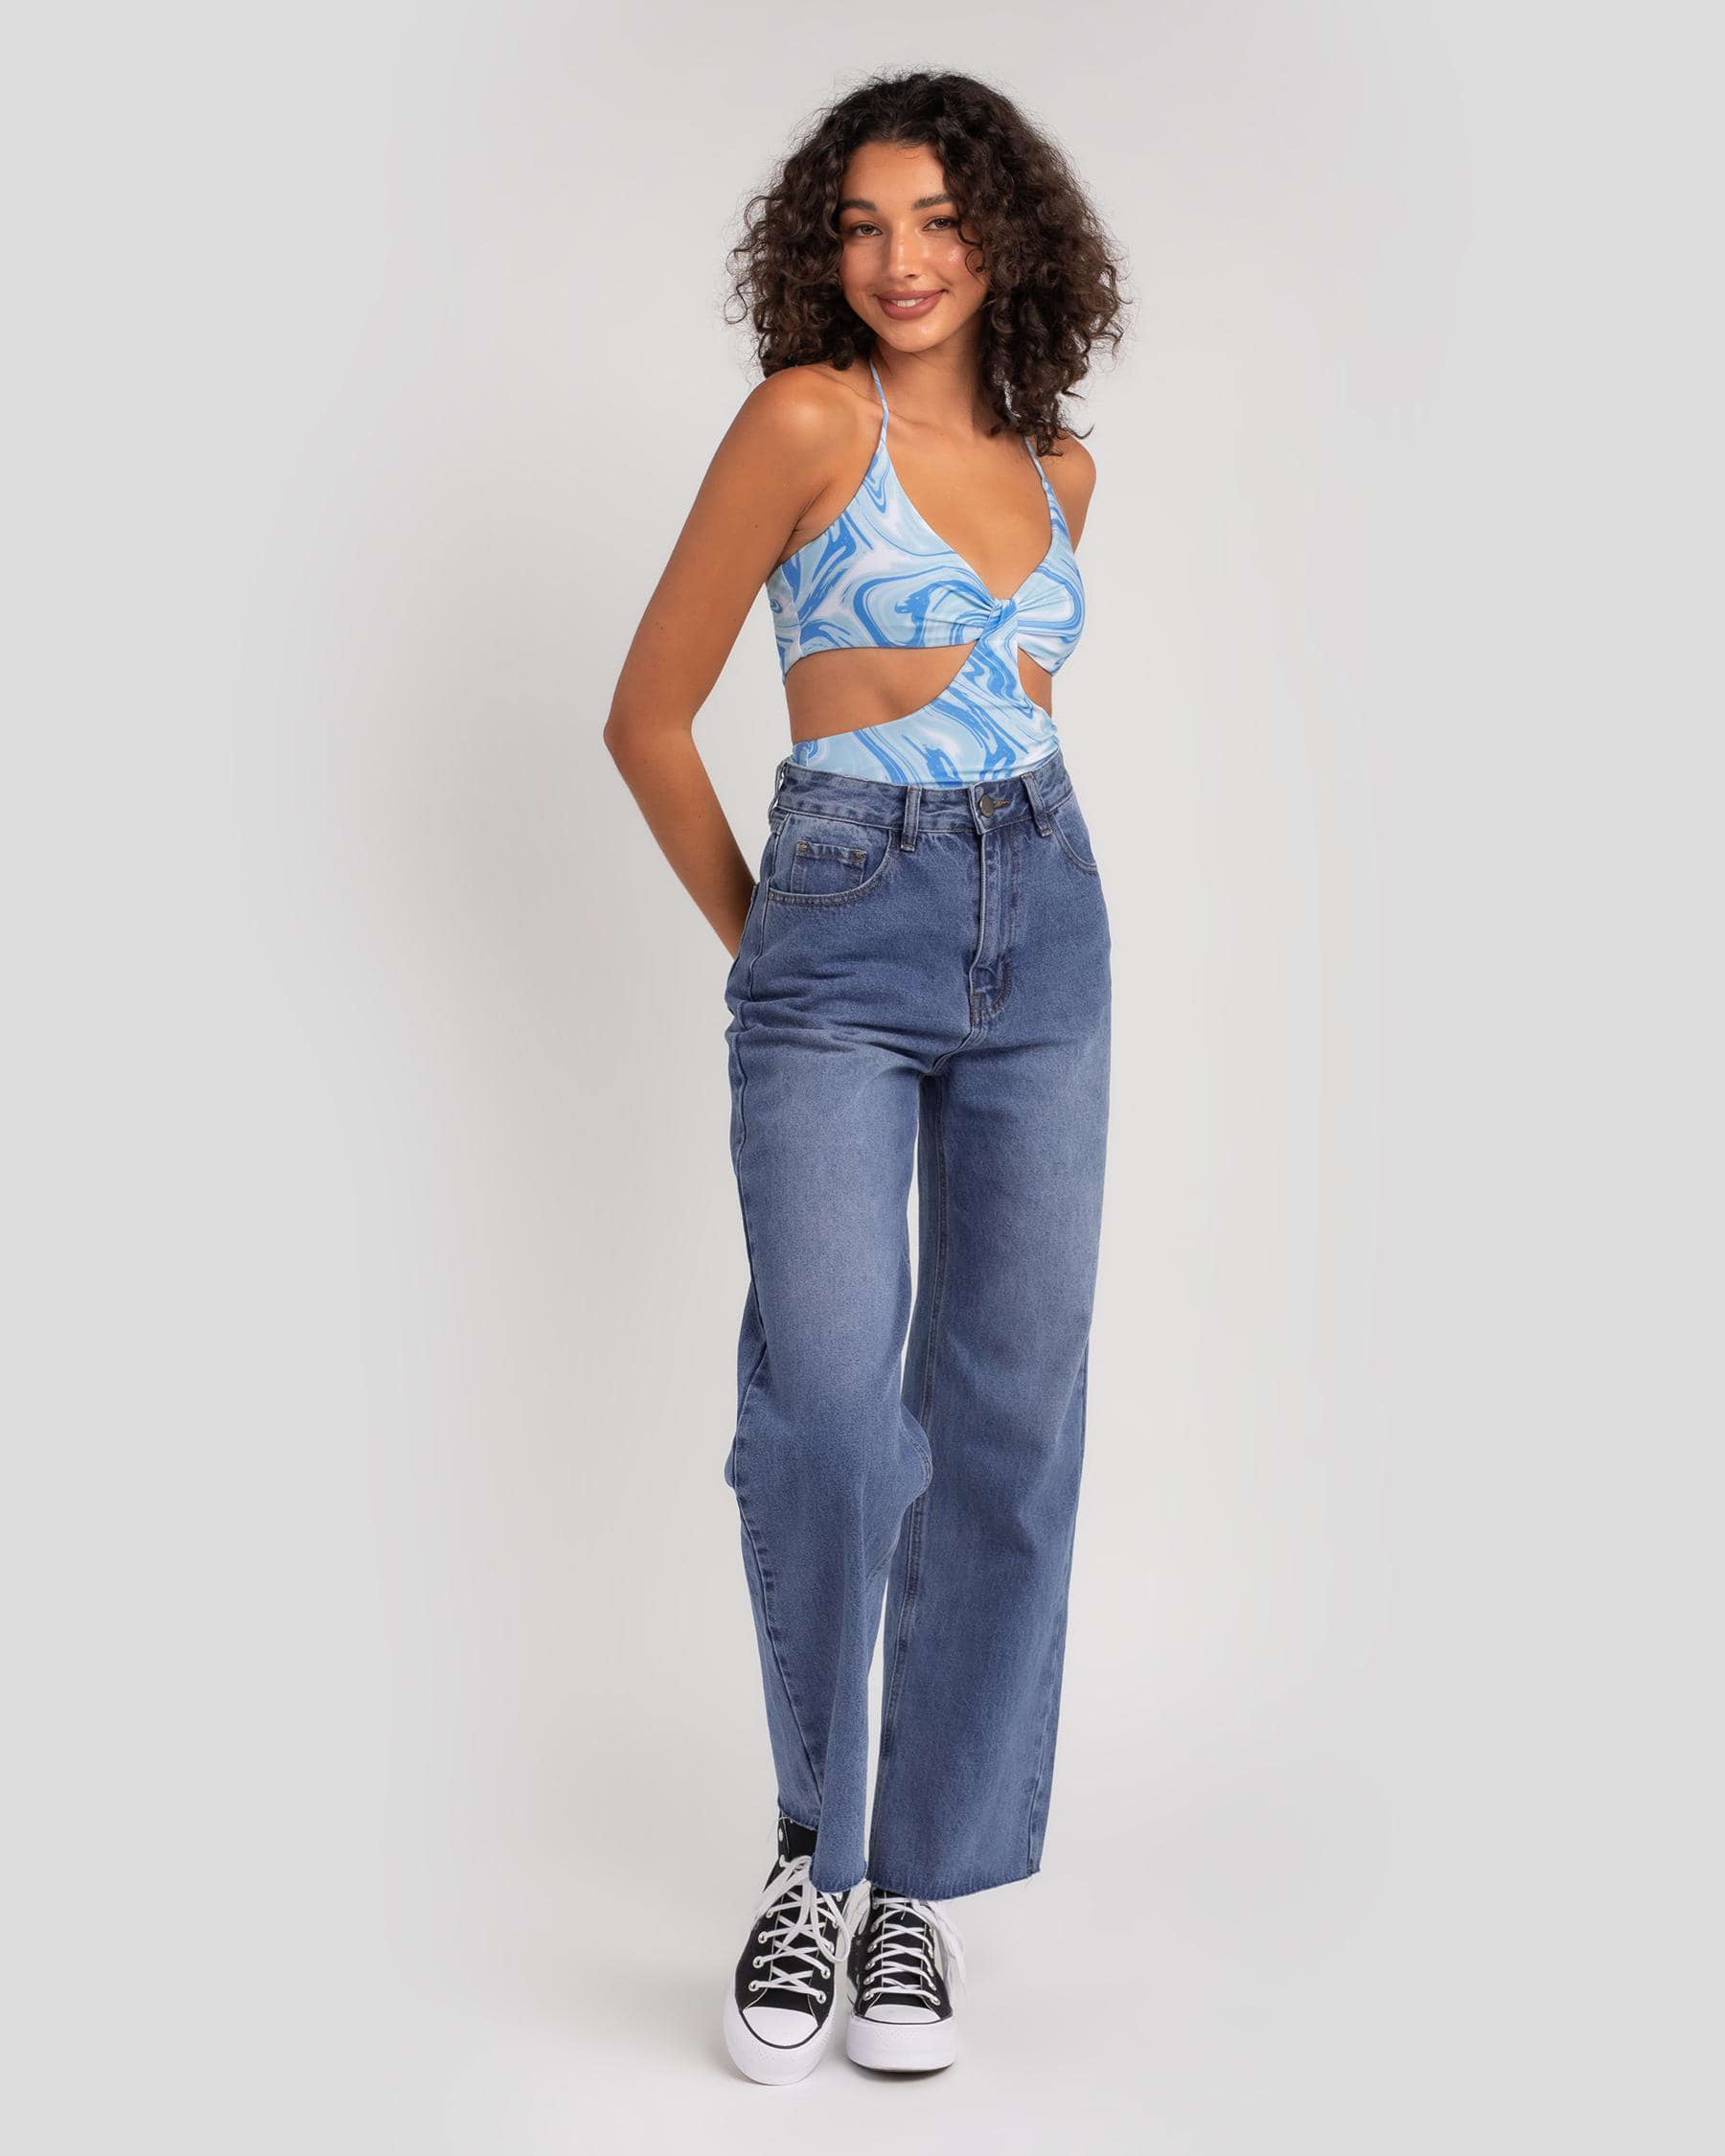 Ava And Ever Blue Lagoon Halter Top In Blue Marble - Fast Shipping ...